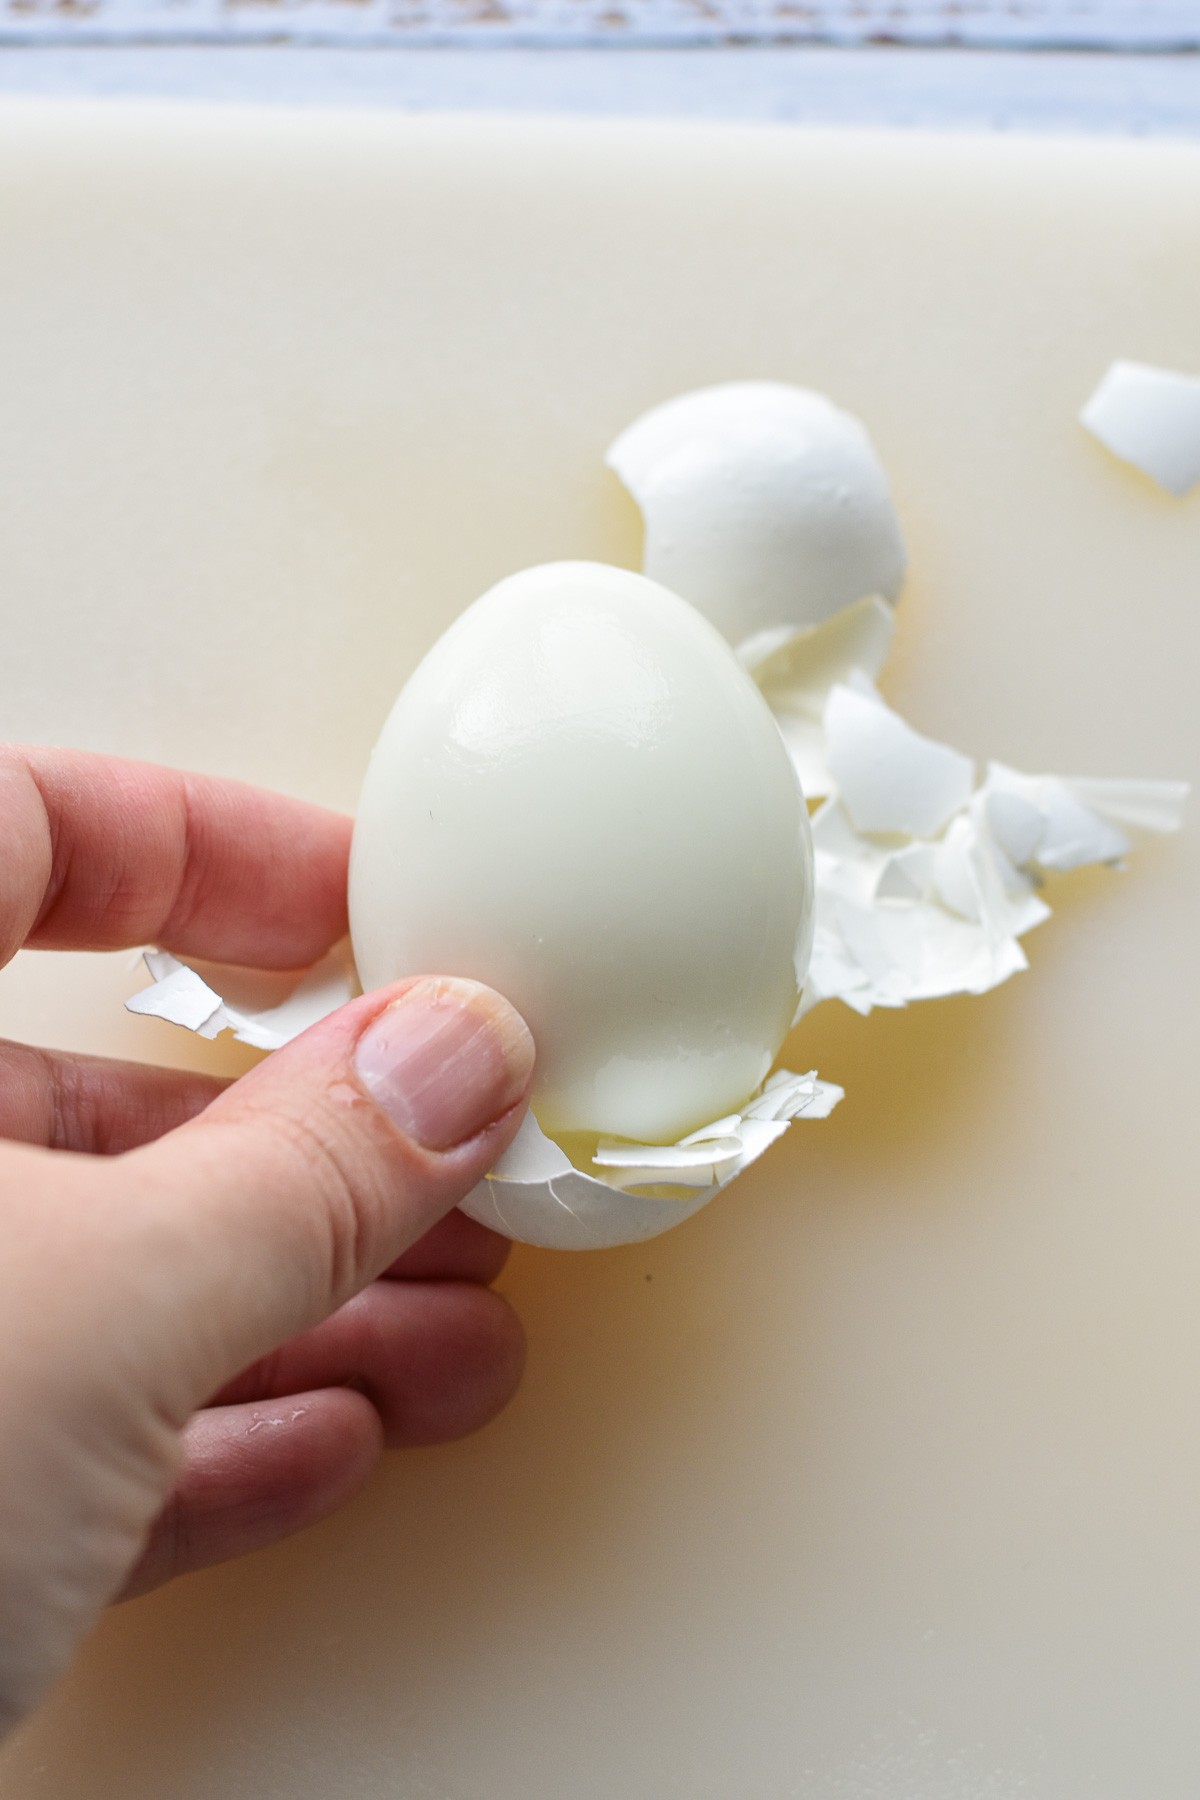 a hand peeling the shell from a hard boiled egg.